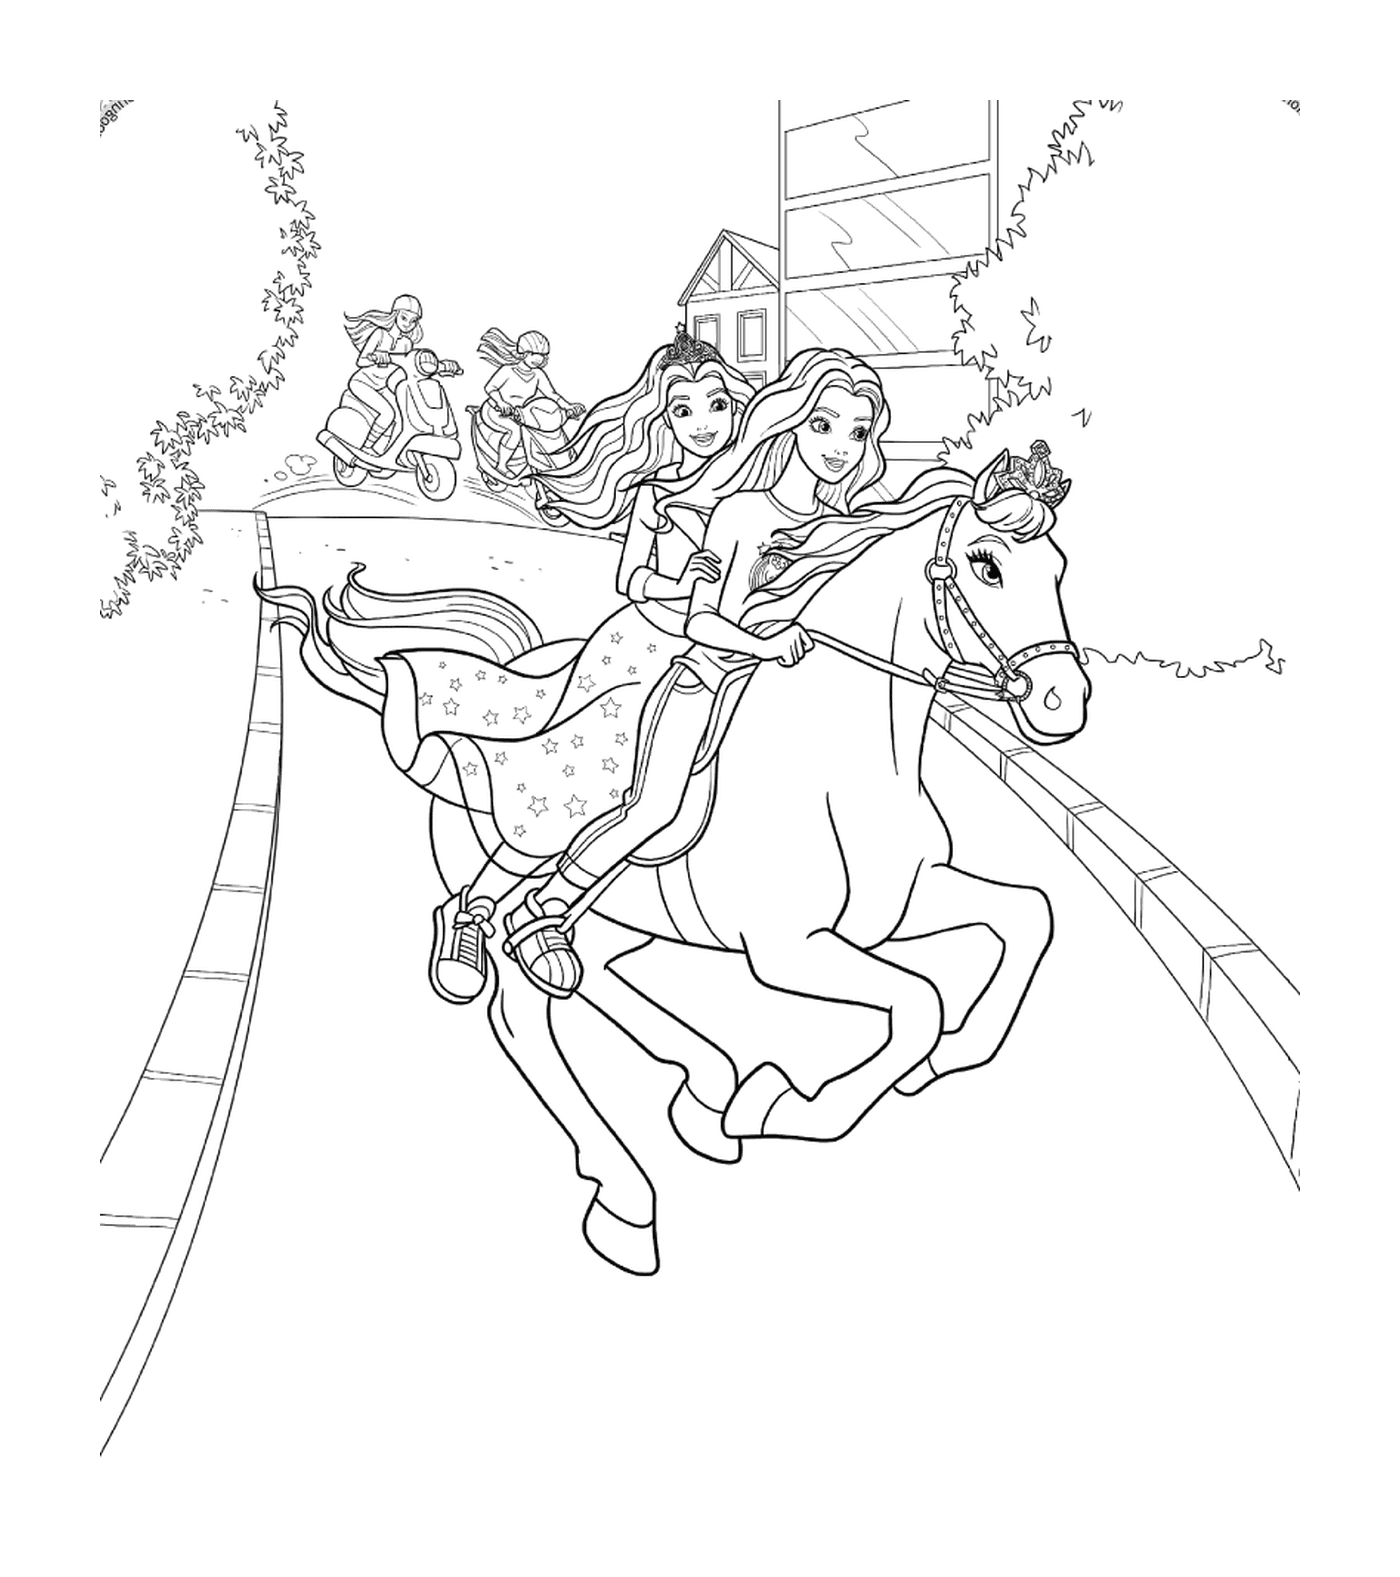  Two women riding a horse 